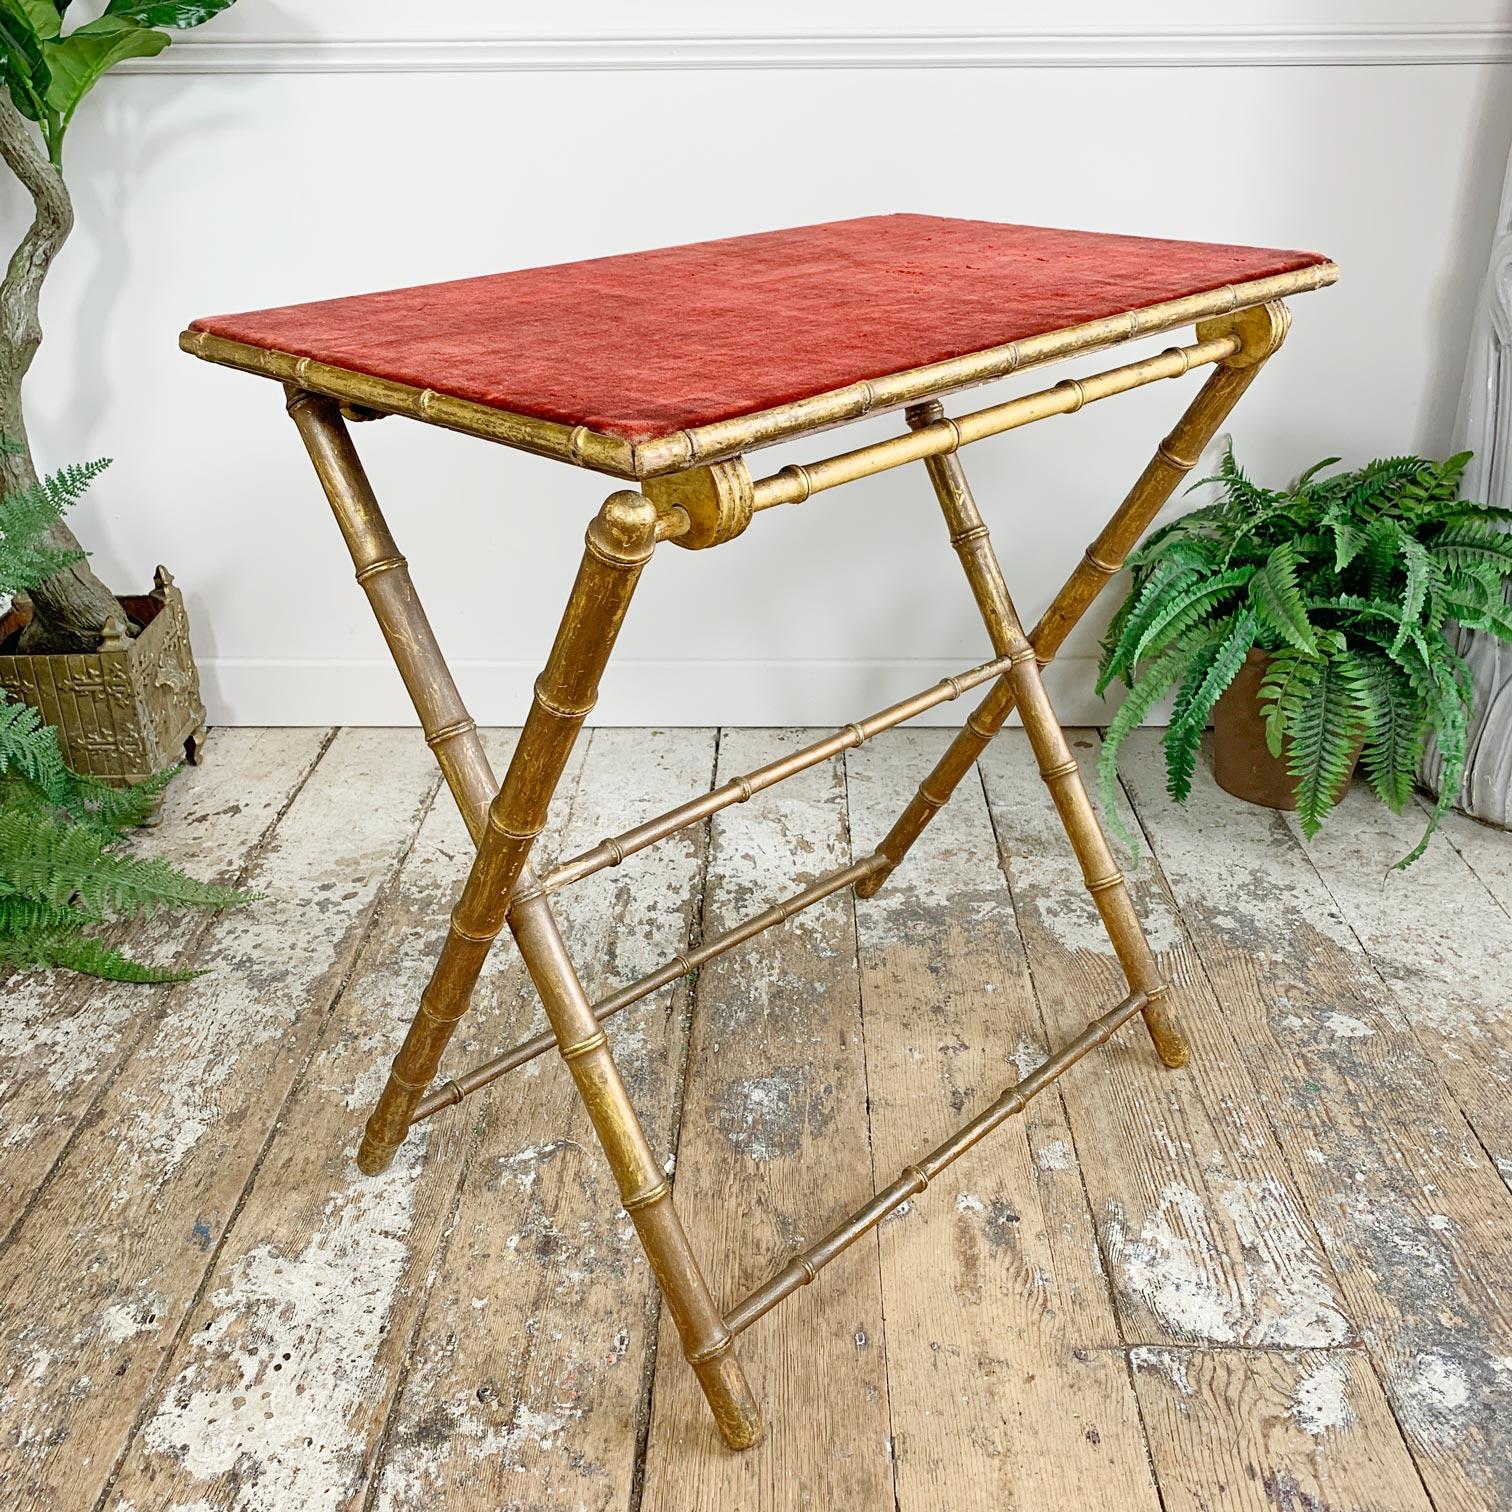 Beautiful late 19th century French faux bamboo card table, original red velvet top, the giltwood legs and top fold flat so it can be easily stored, perfect for late night poker or as an elegant occasional table.

The red velvet top has obvious